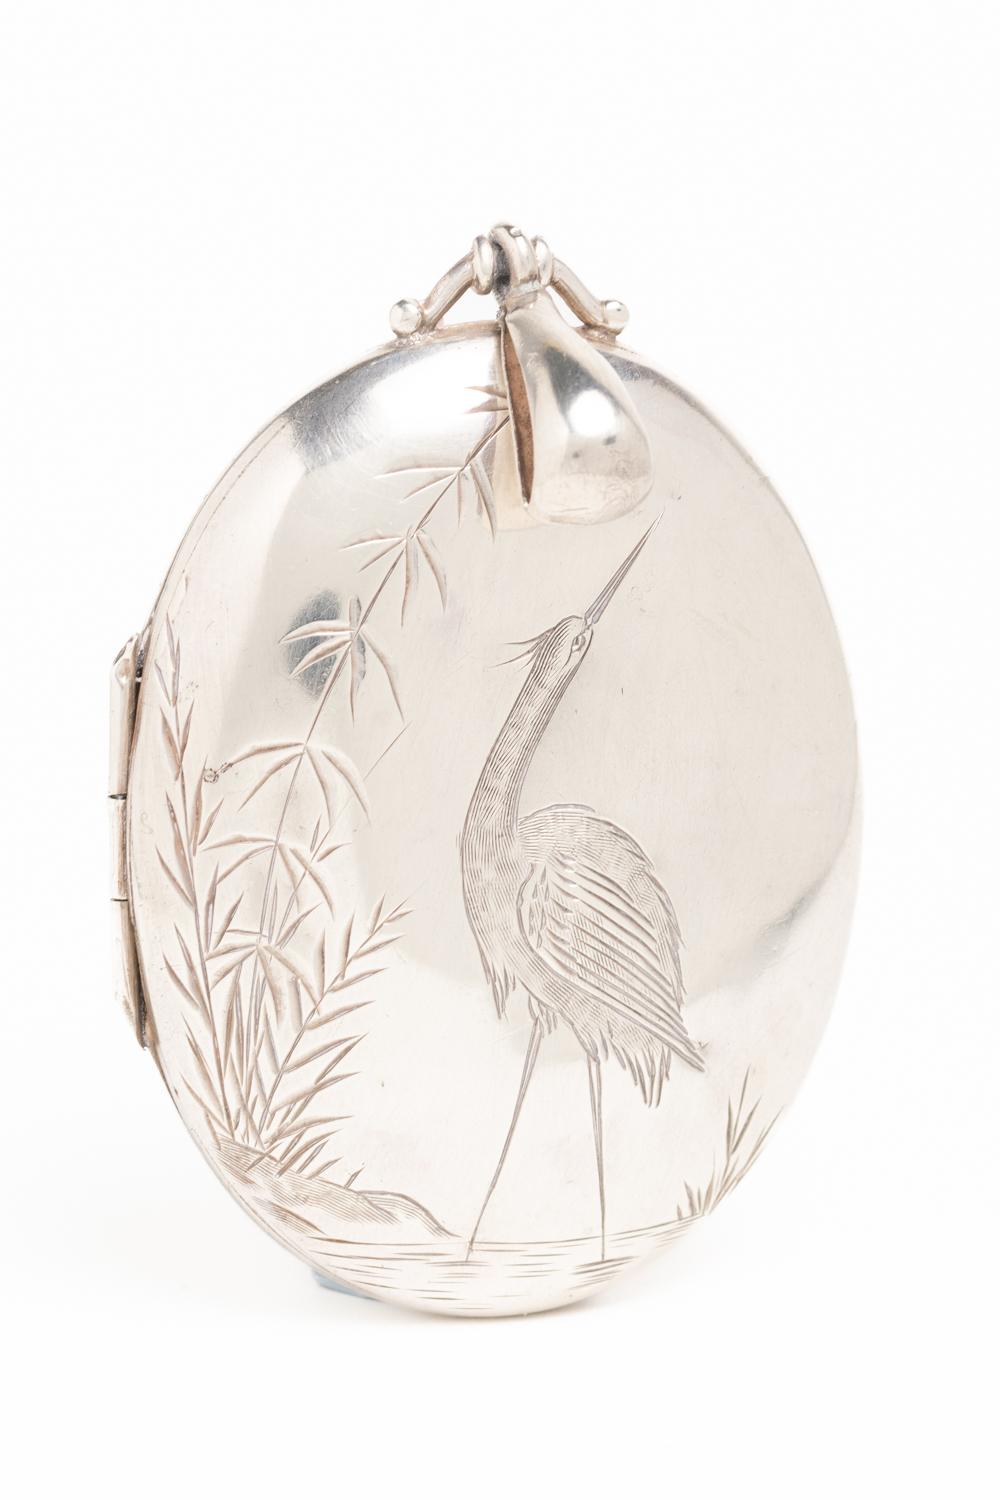 Antique Victorian sterling silver locket dated 1876. This extraordinary silver locket is hallmarked for Birmingham and made by Horace Woodward & Co. The front depicts a Japonesque-style scene, a heron in the centre of the piece standing among